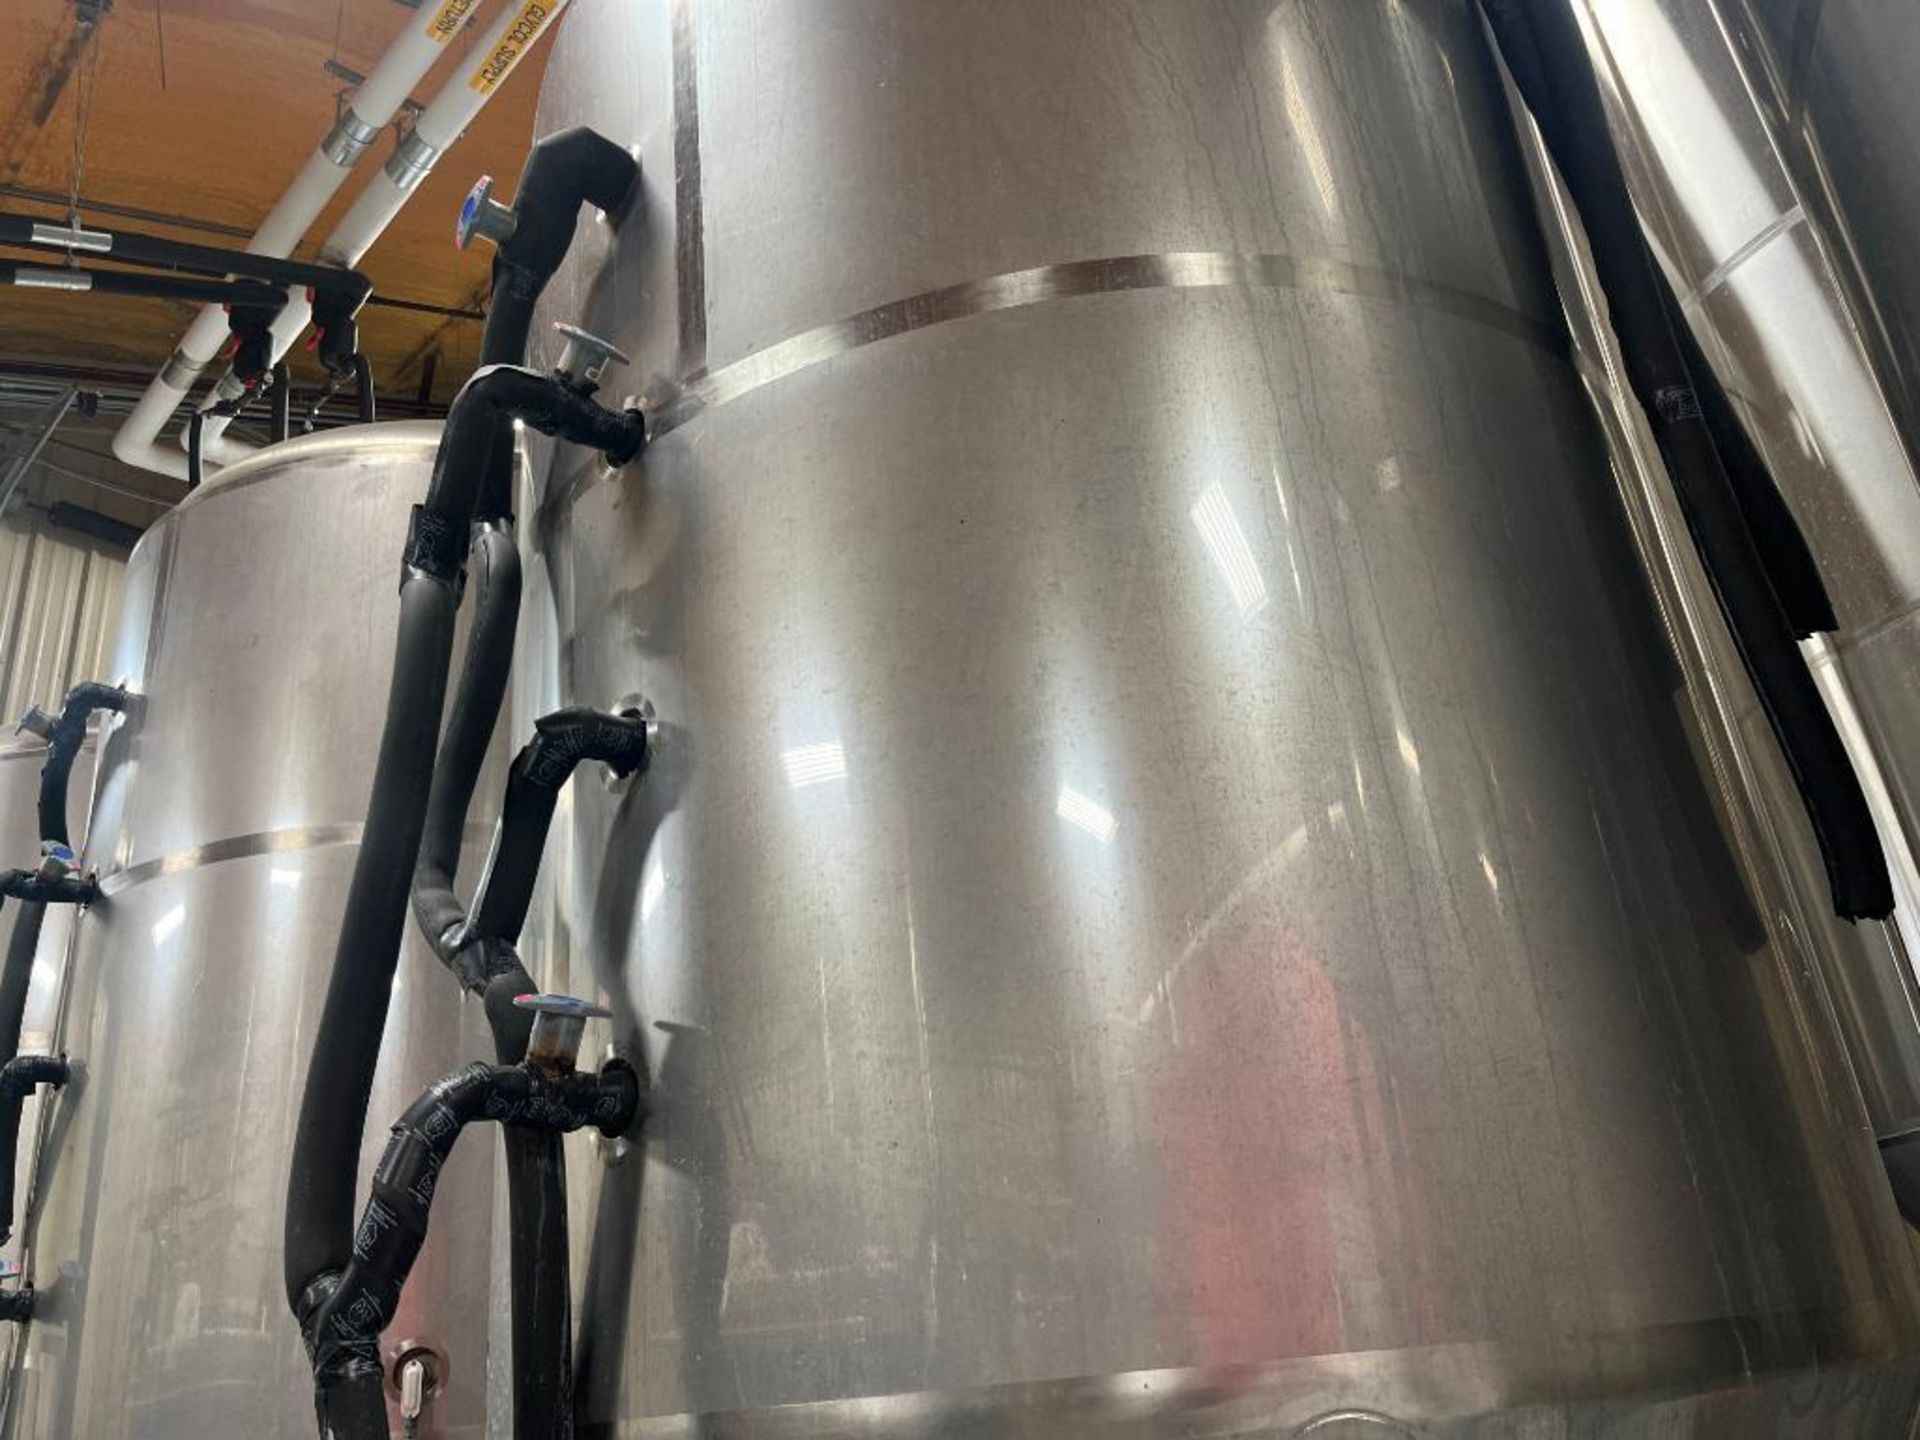 Shenzhen Jacketed Fermenter Tank, 60BBL (1800 Gallon), 304 Stainless Steel. Dished top coned bottom. - Image 4 of 11